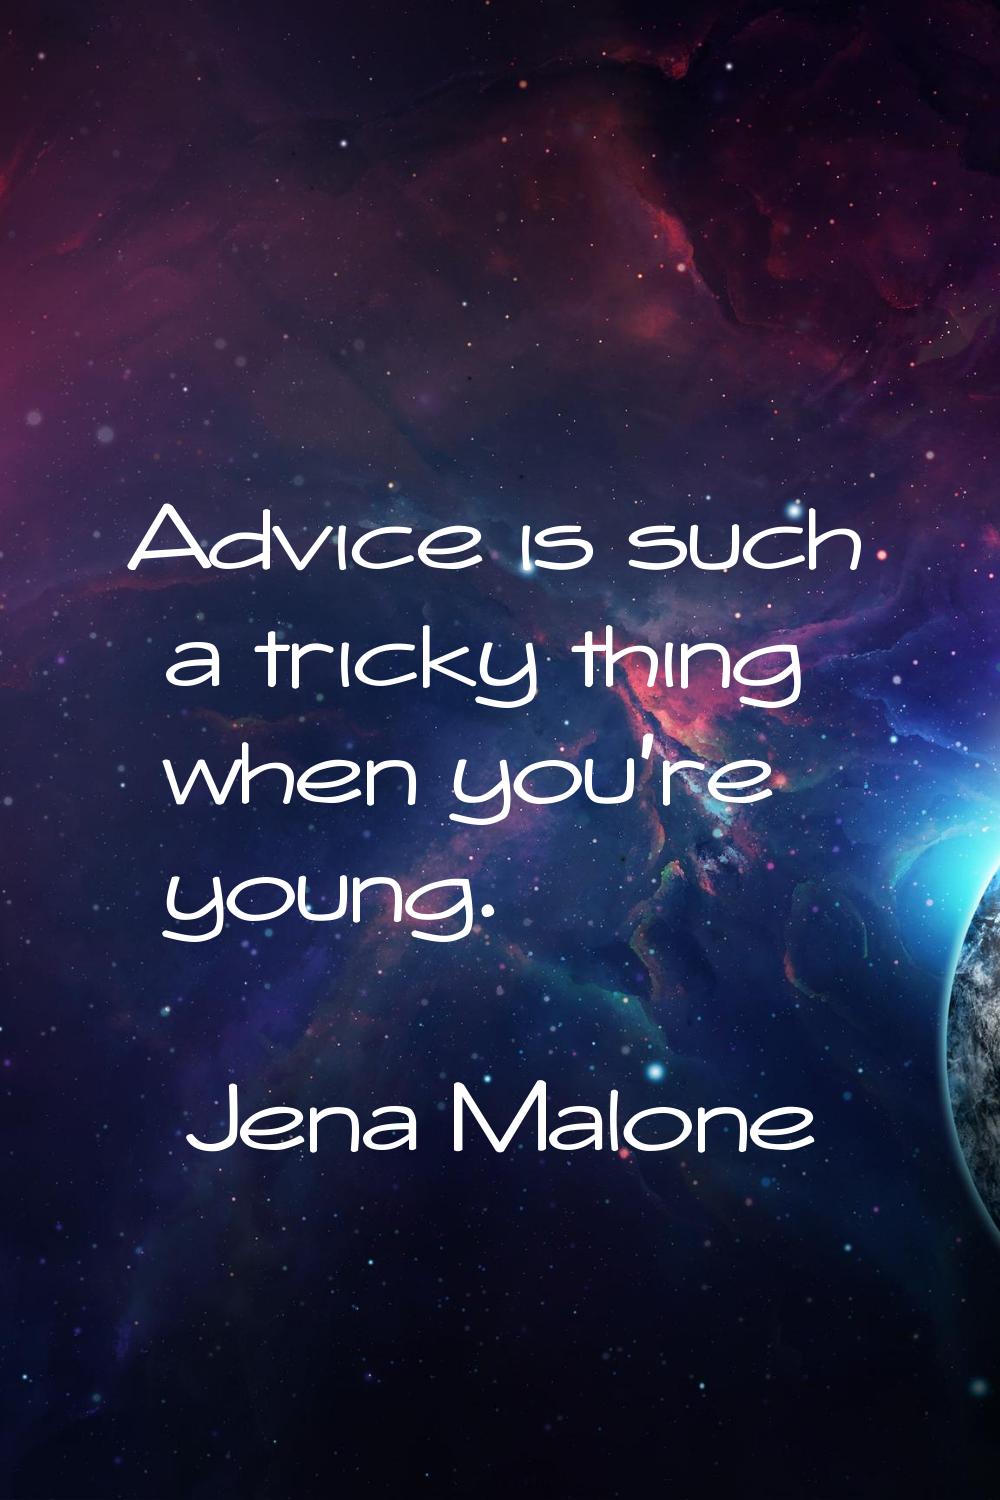 Advice is such a tricky thing when you're young.